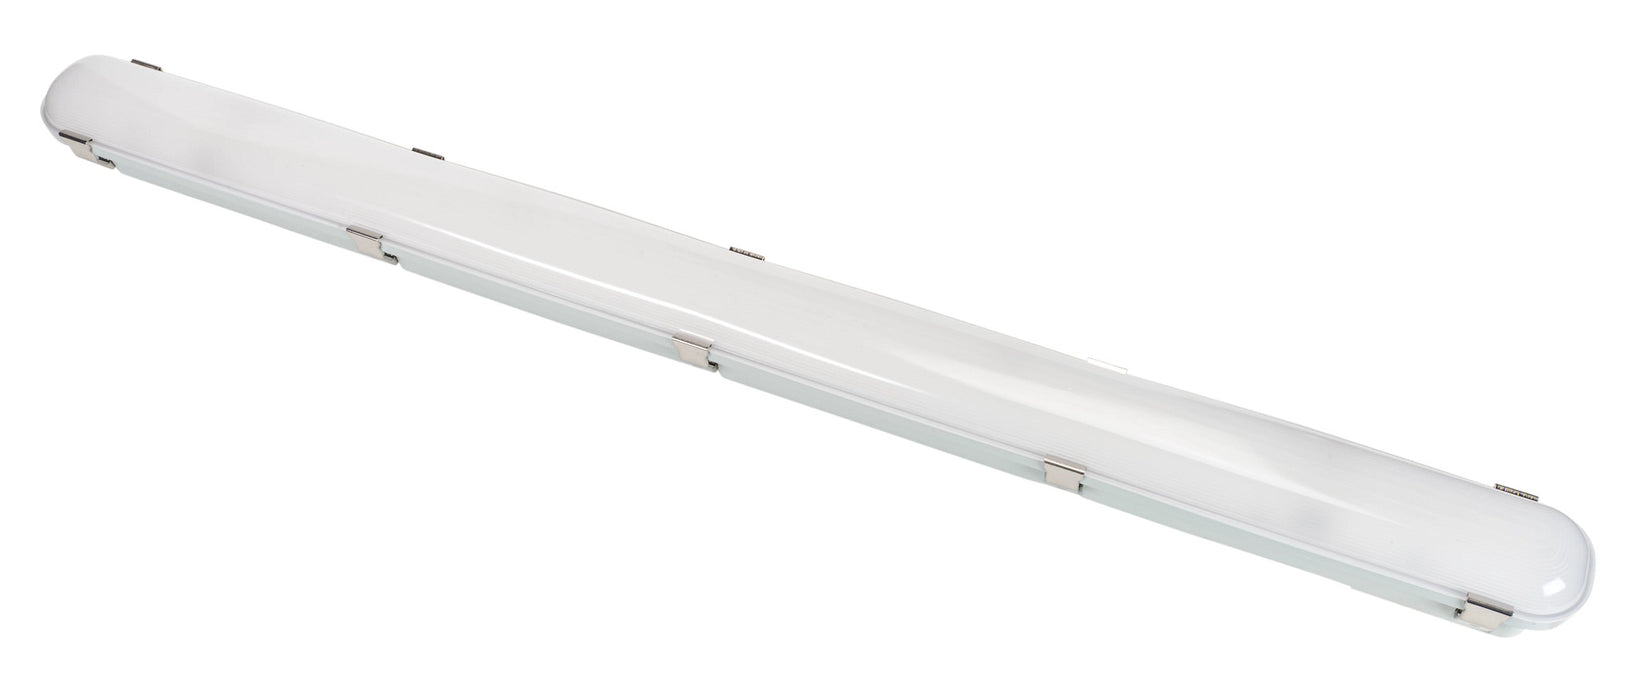 Keystone 4 Foot Vapor Tight Fixture Featuring Wattage/CCT Selectable 75/64/44W 3500K/4000K/5000K 120-277V Frosted Lens 0-10V Dimming (KT-VTLED75PS-4A-8CSA-VDIM)